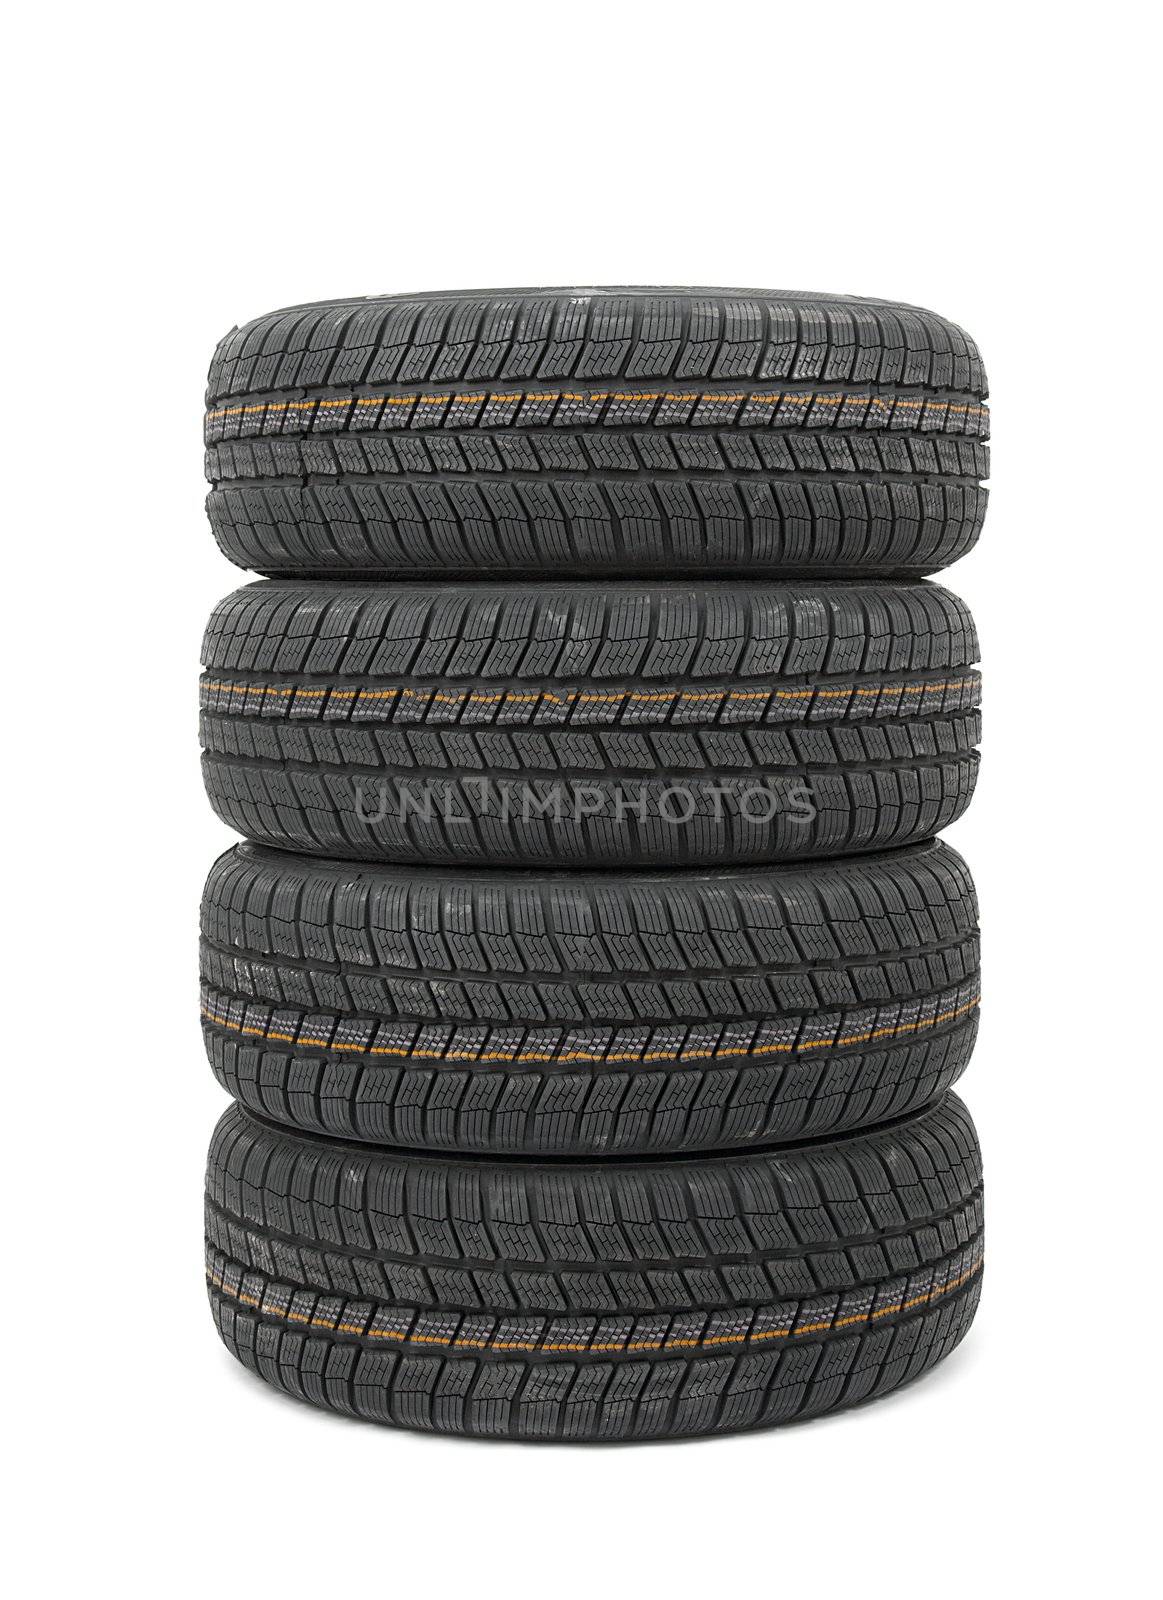 A set of new winter tyres